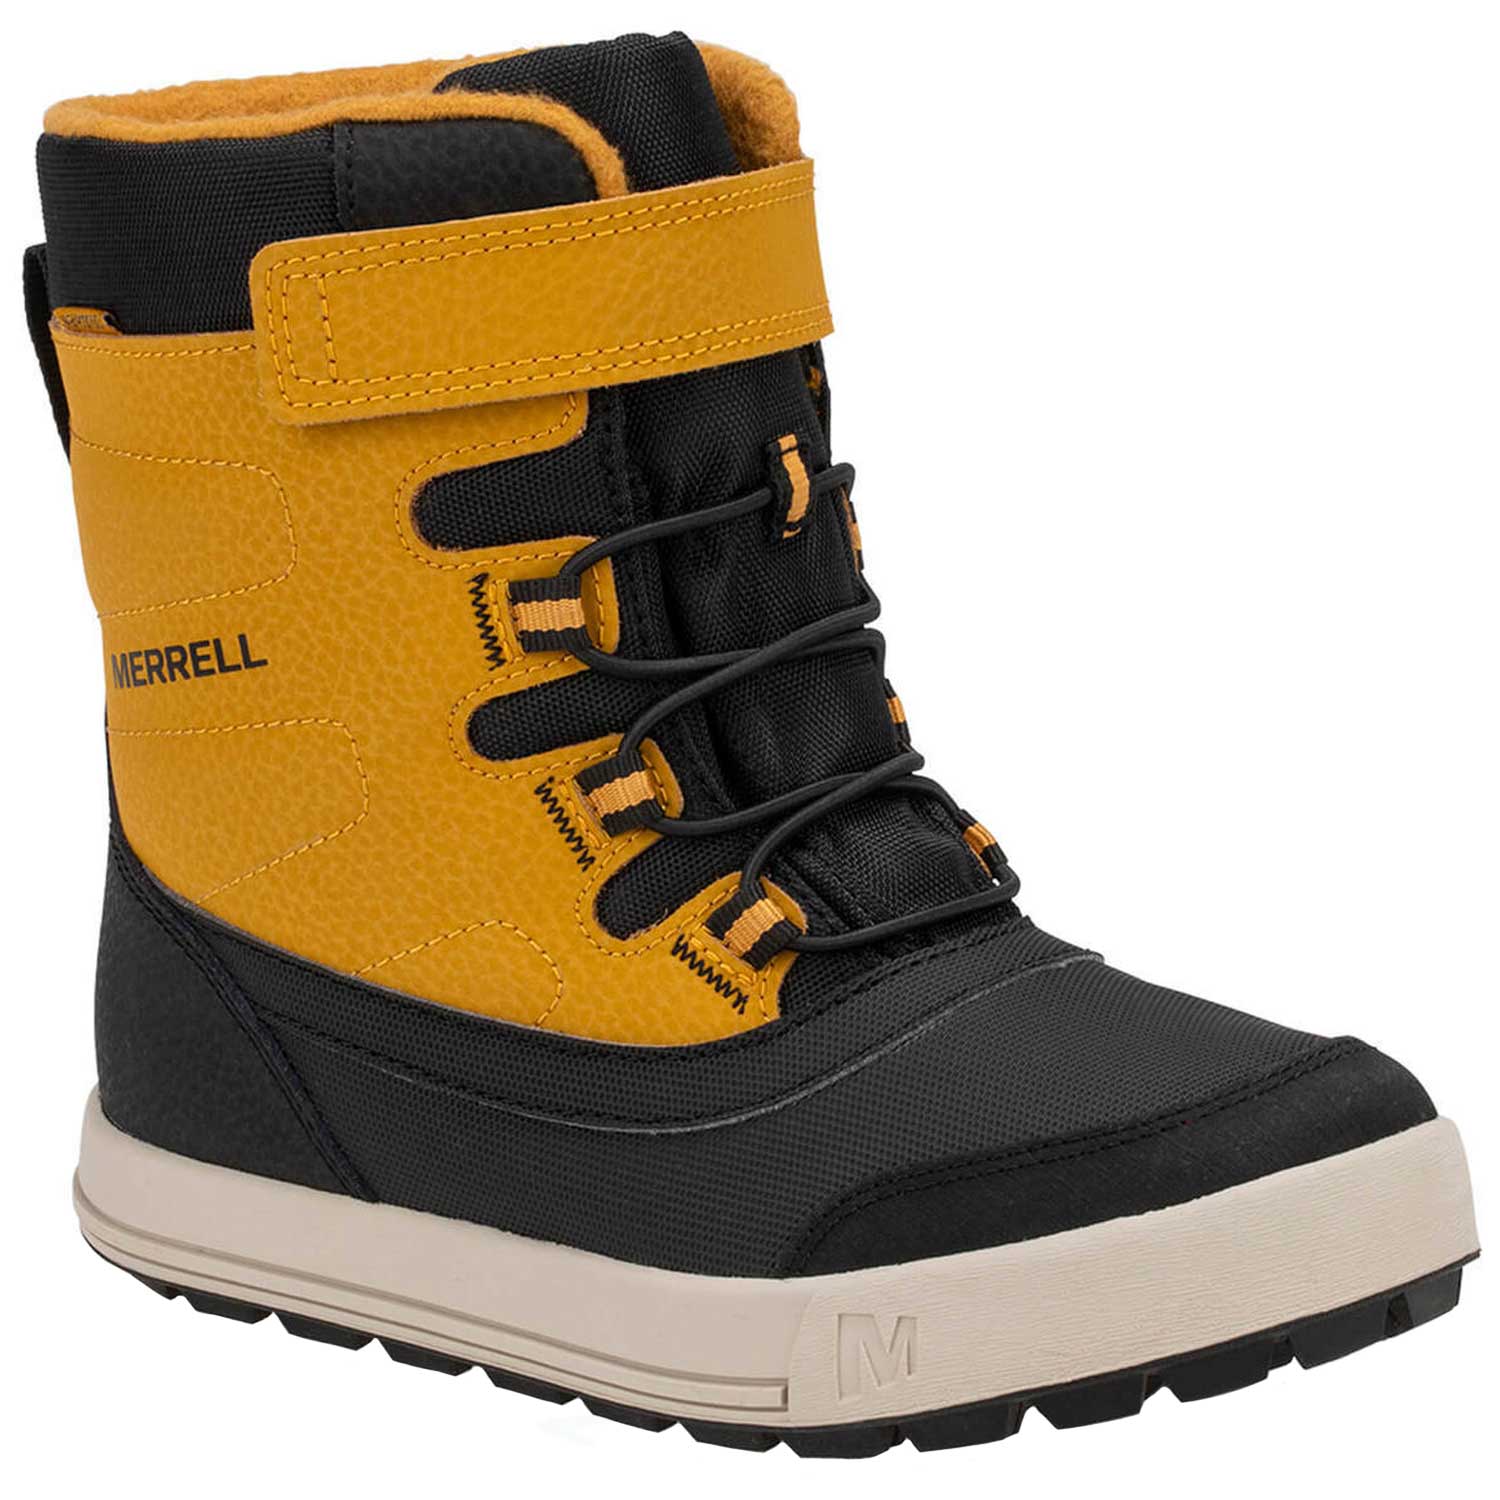 Youth Winter Boots